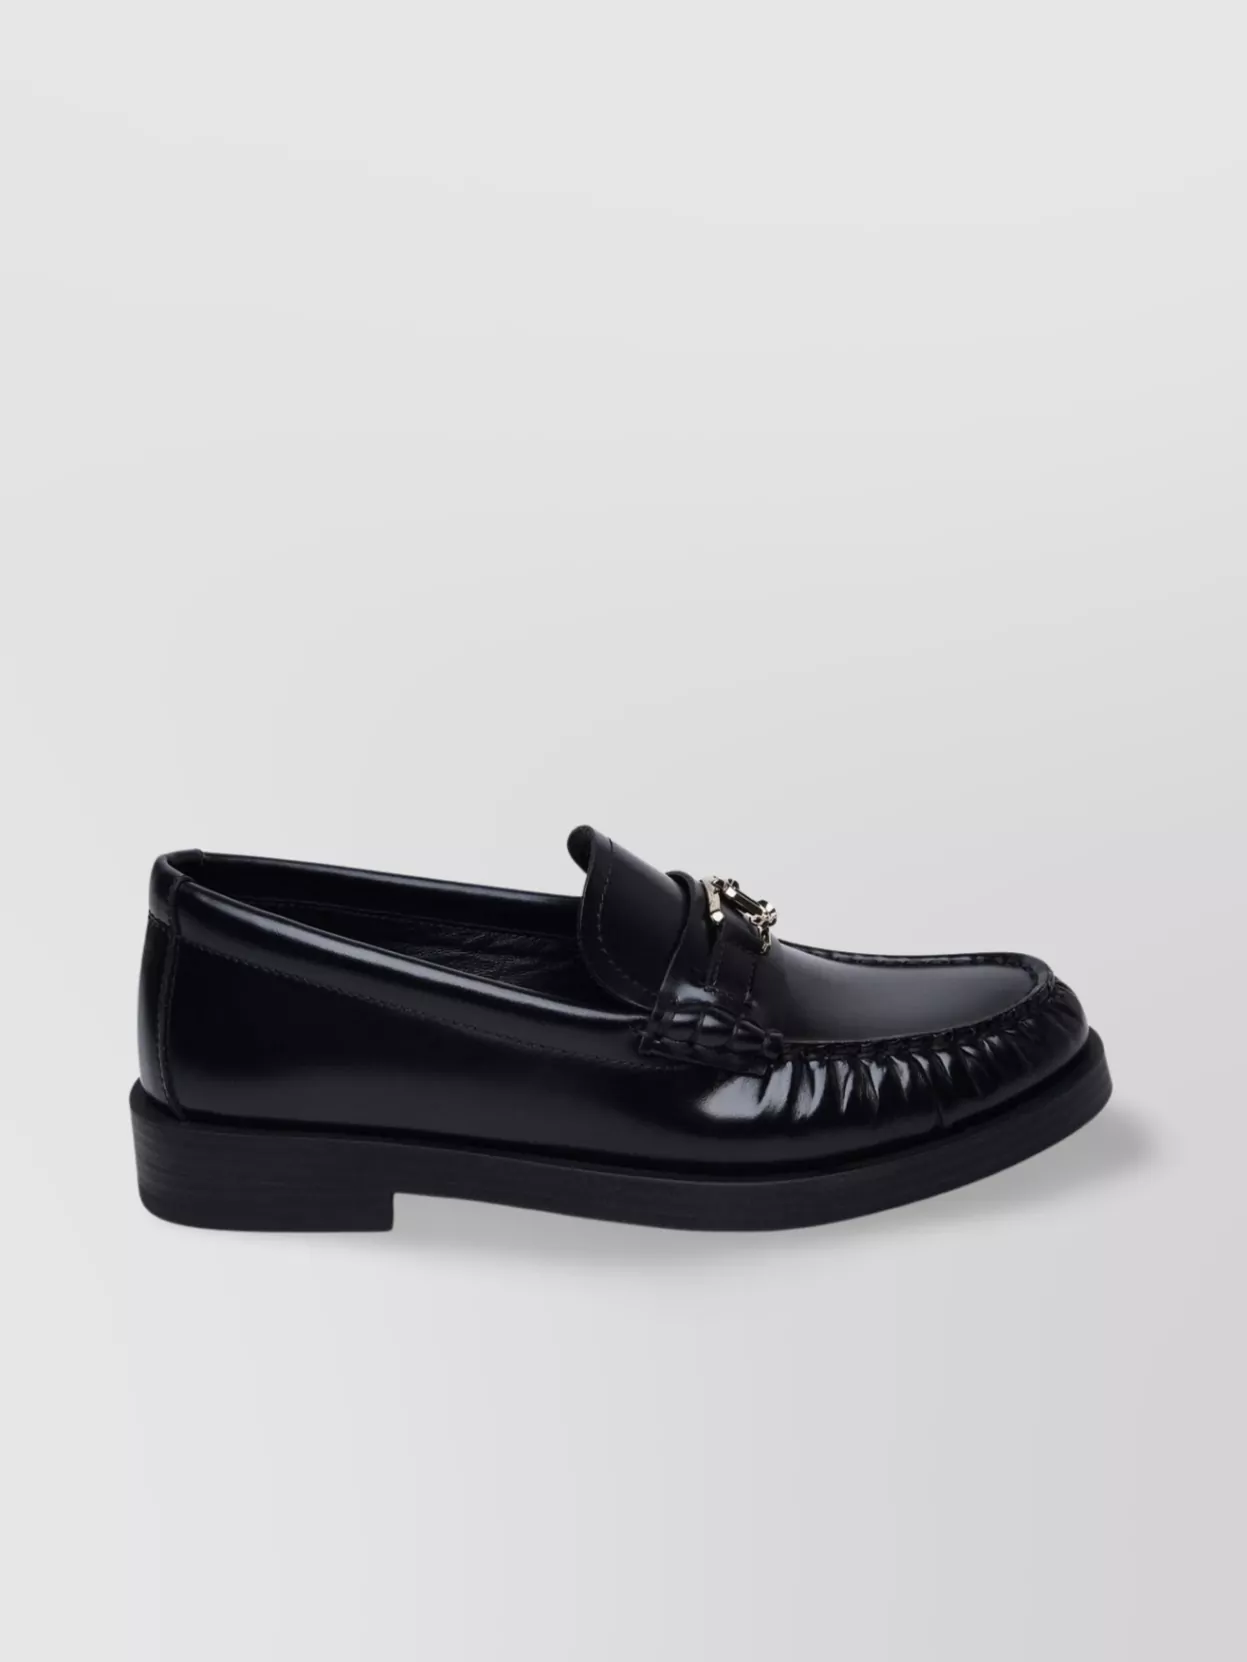 Jimmy Choo Leather Loafers With Glossy Finish And Metallic Accent In Black